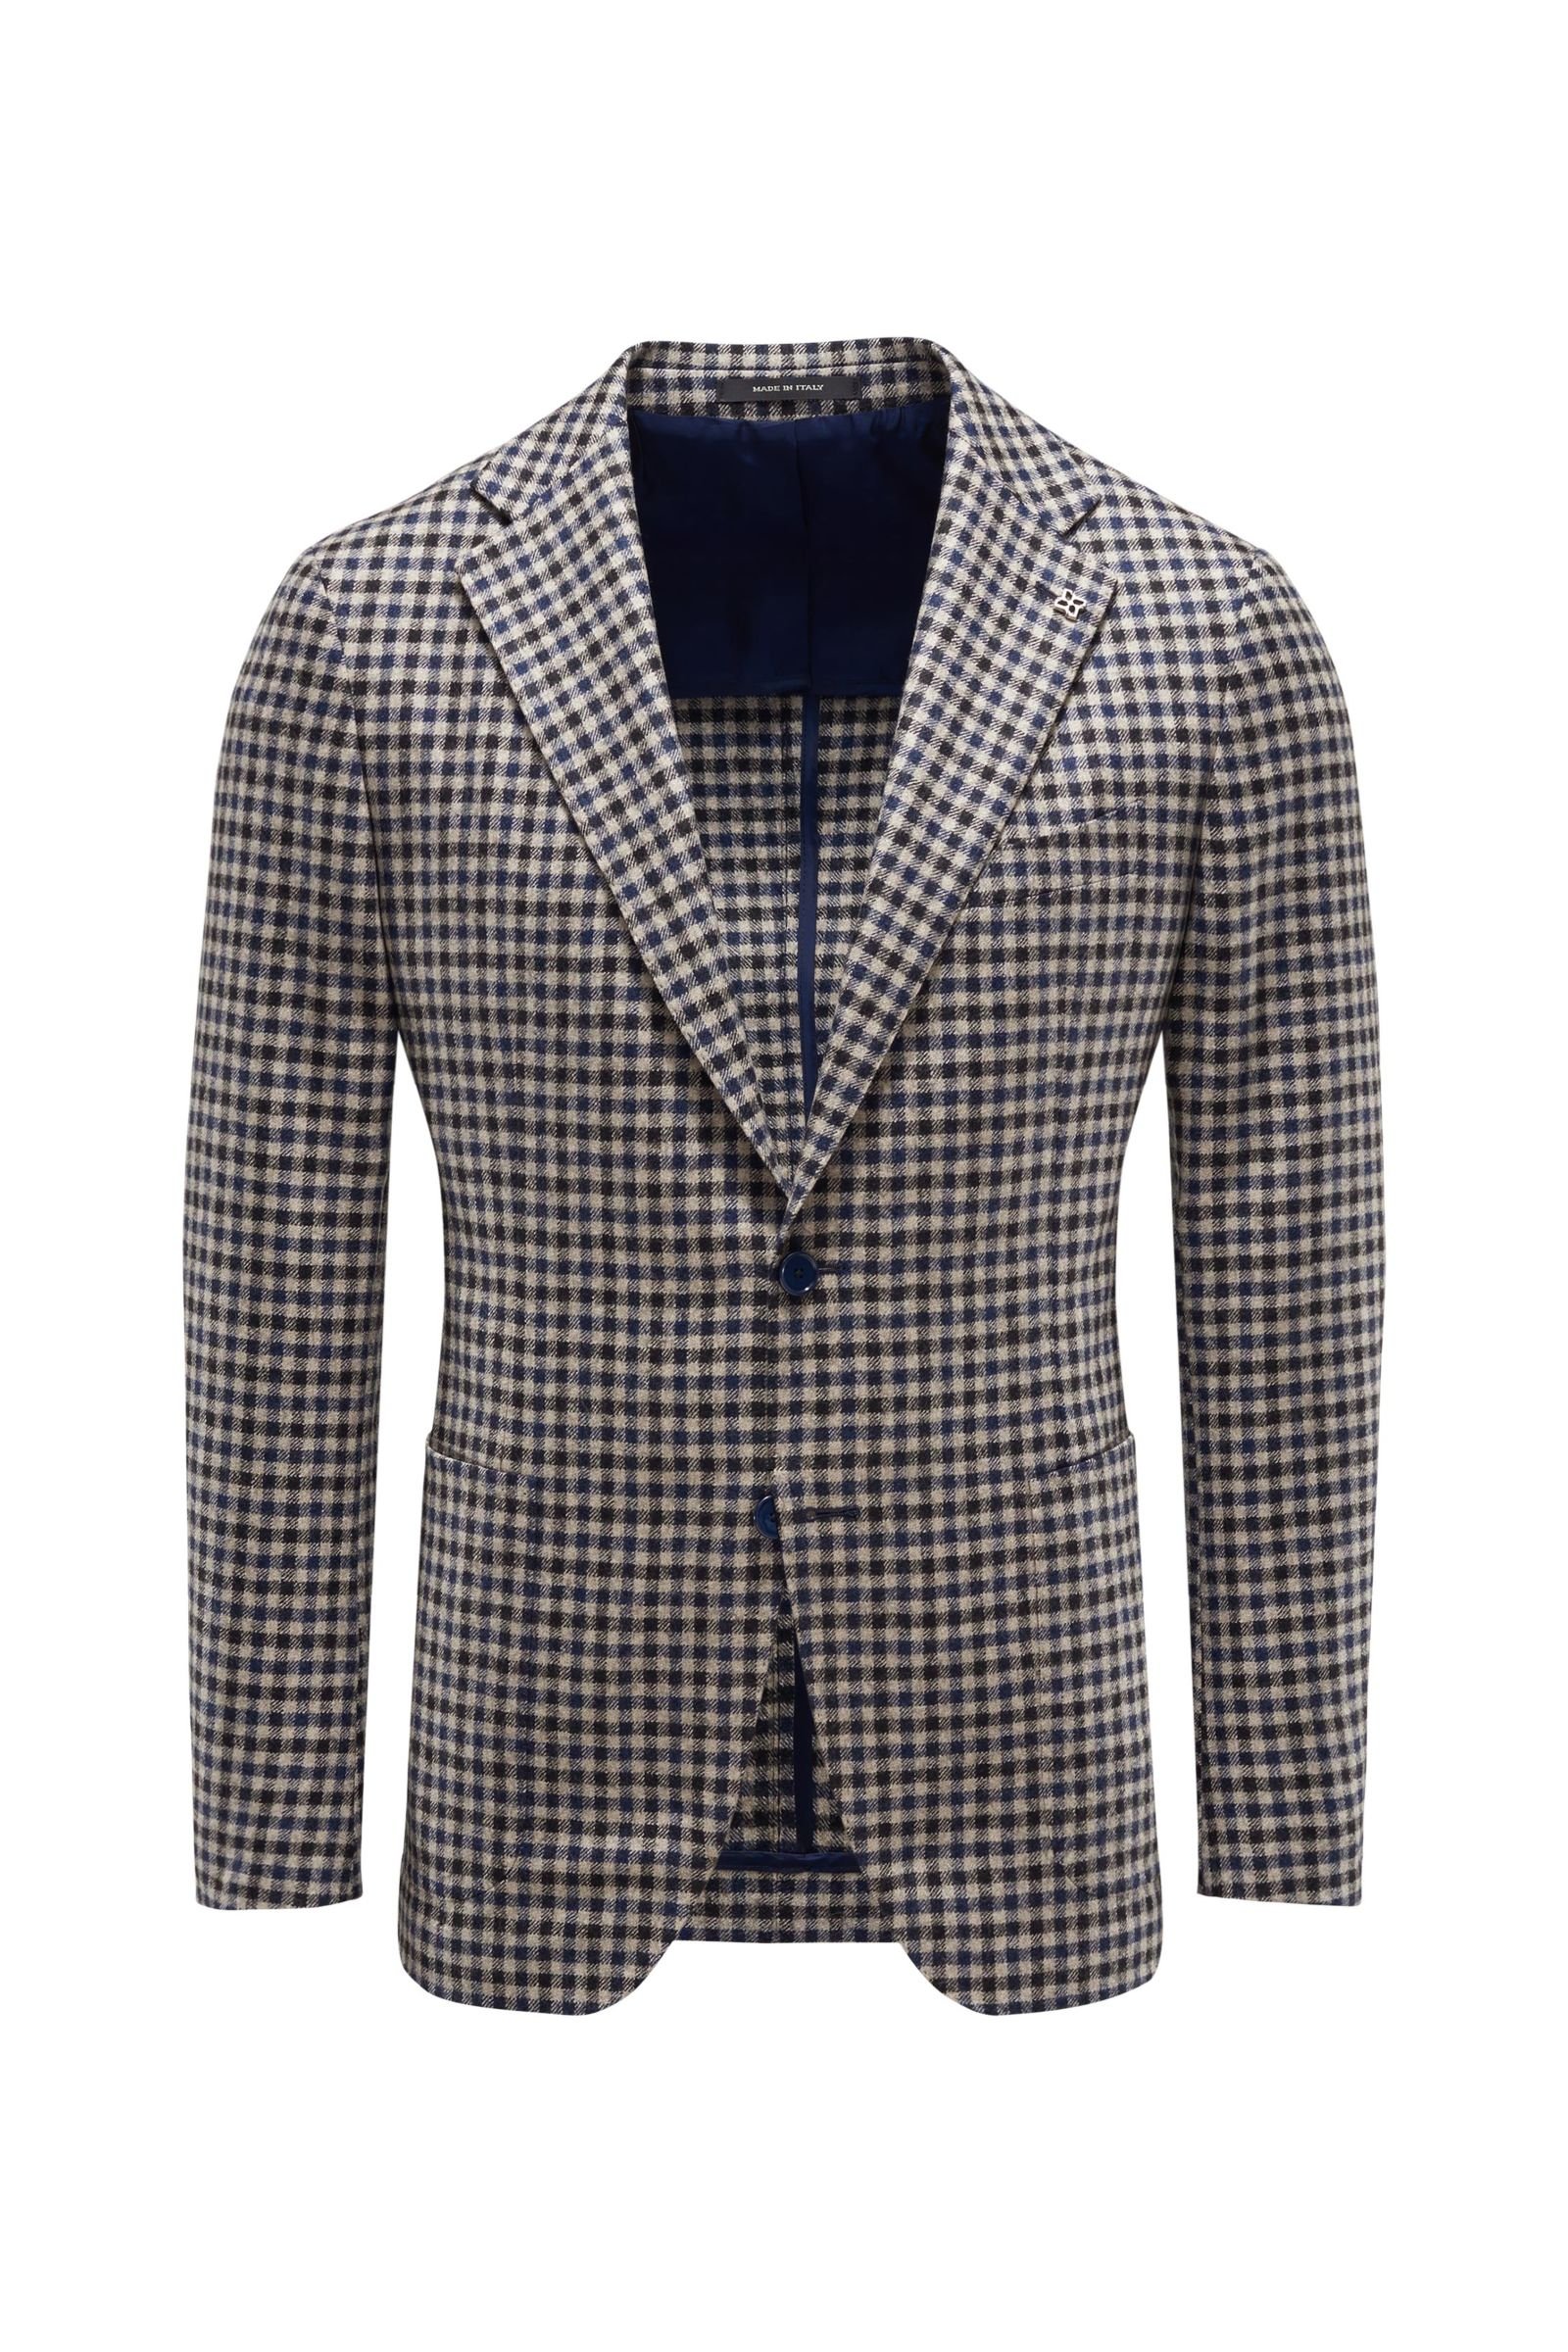 Smart-casual jacket beige/navy checked